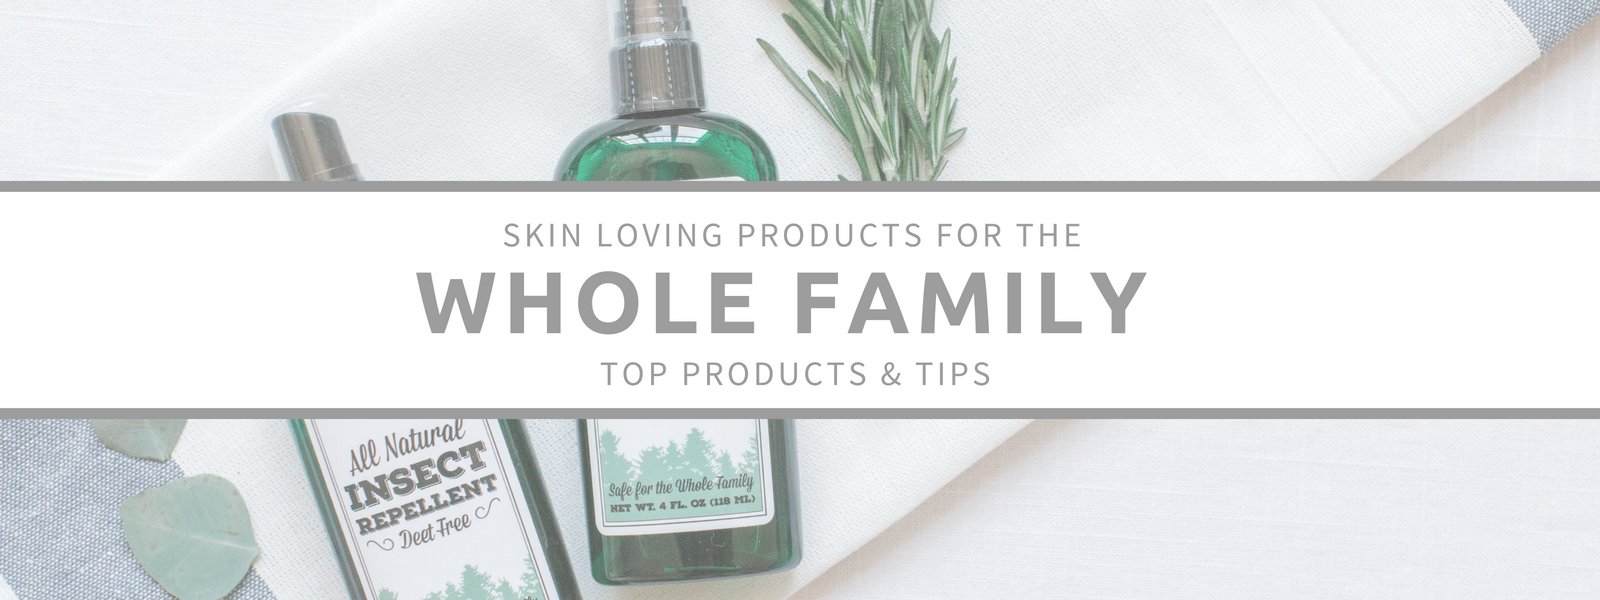 WHOLE FAMILY SKINCARE PRODUCTS